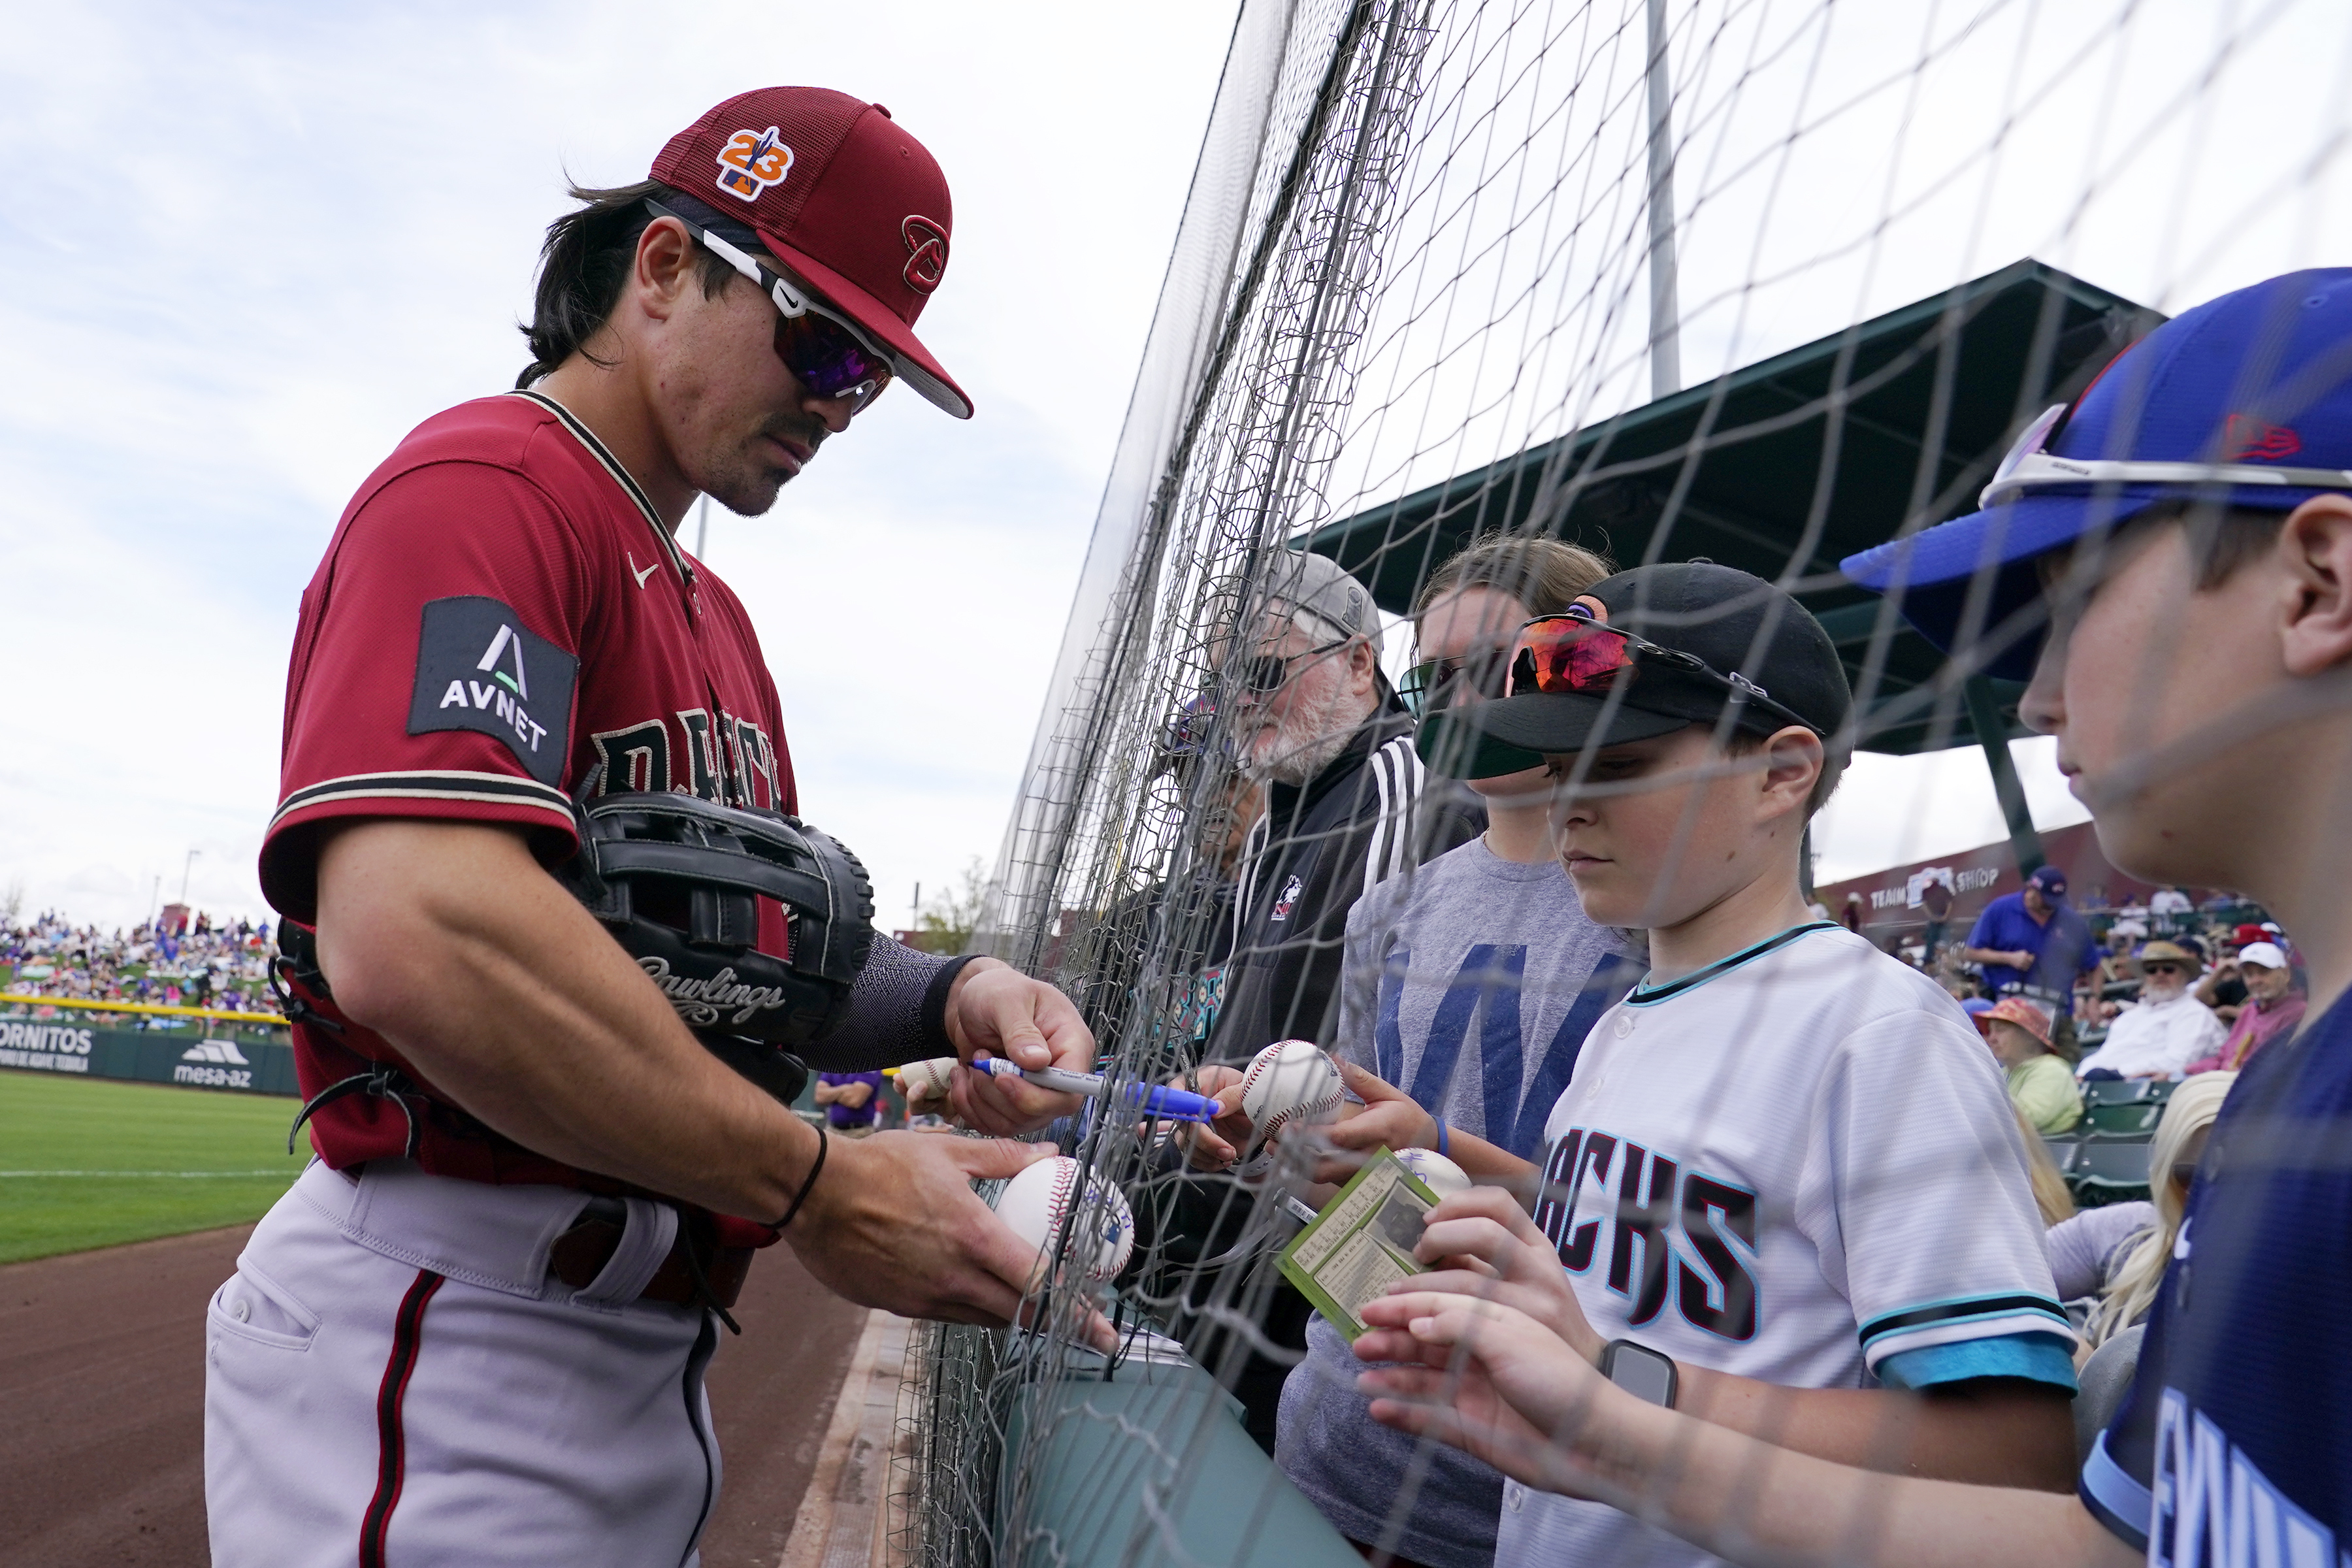 Mariners to open Minor League Spring Training to fans